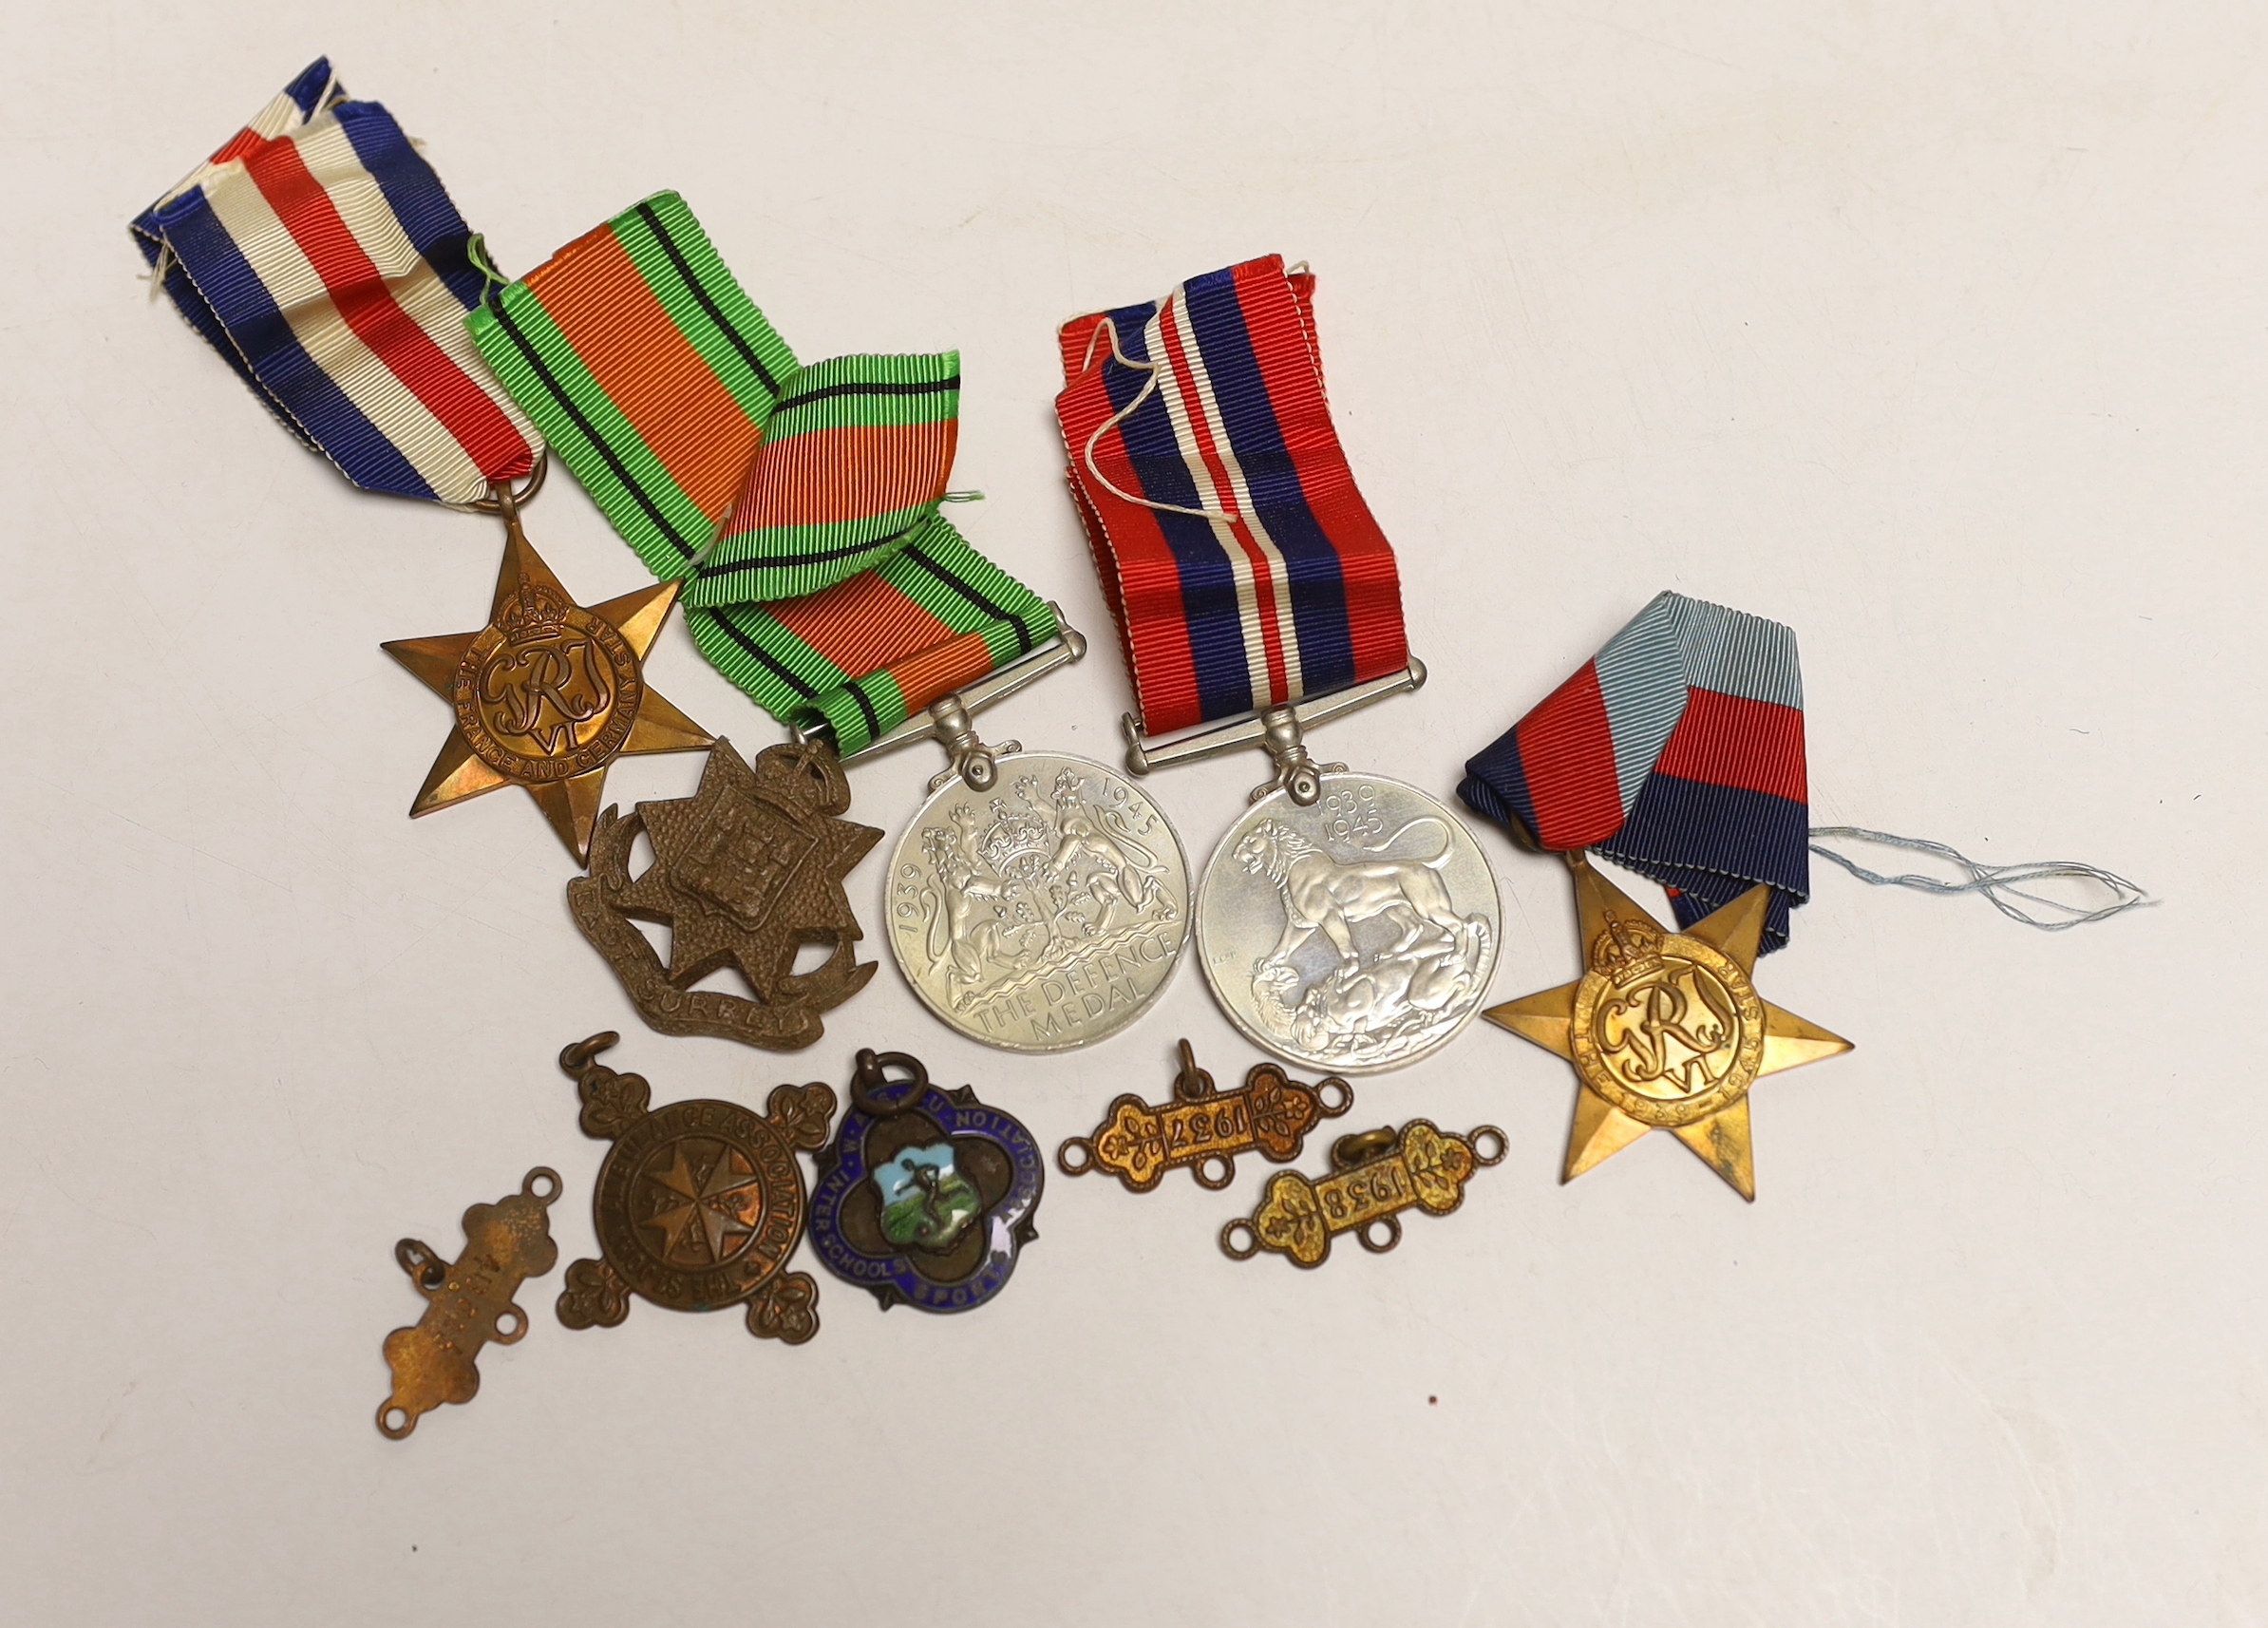 Four WW2 medals- the Defence Medal, the War medal, the 1939-1945 Star and the France & Germany Star and other minor items.